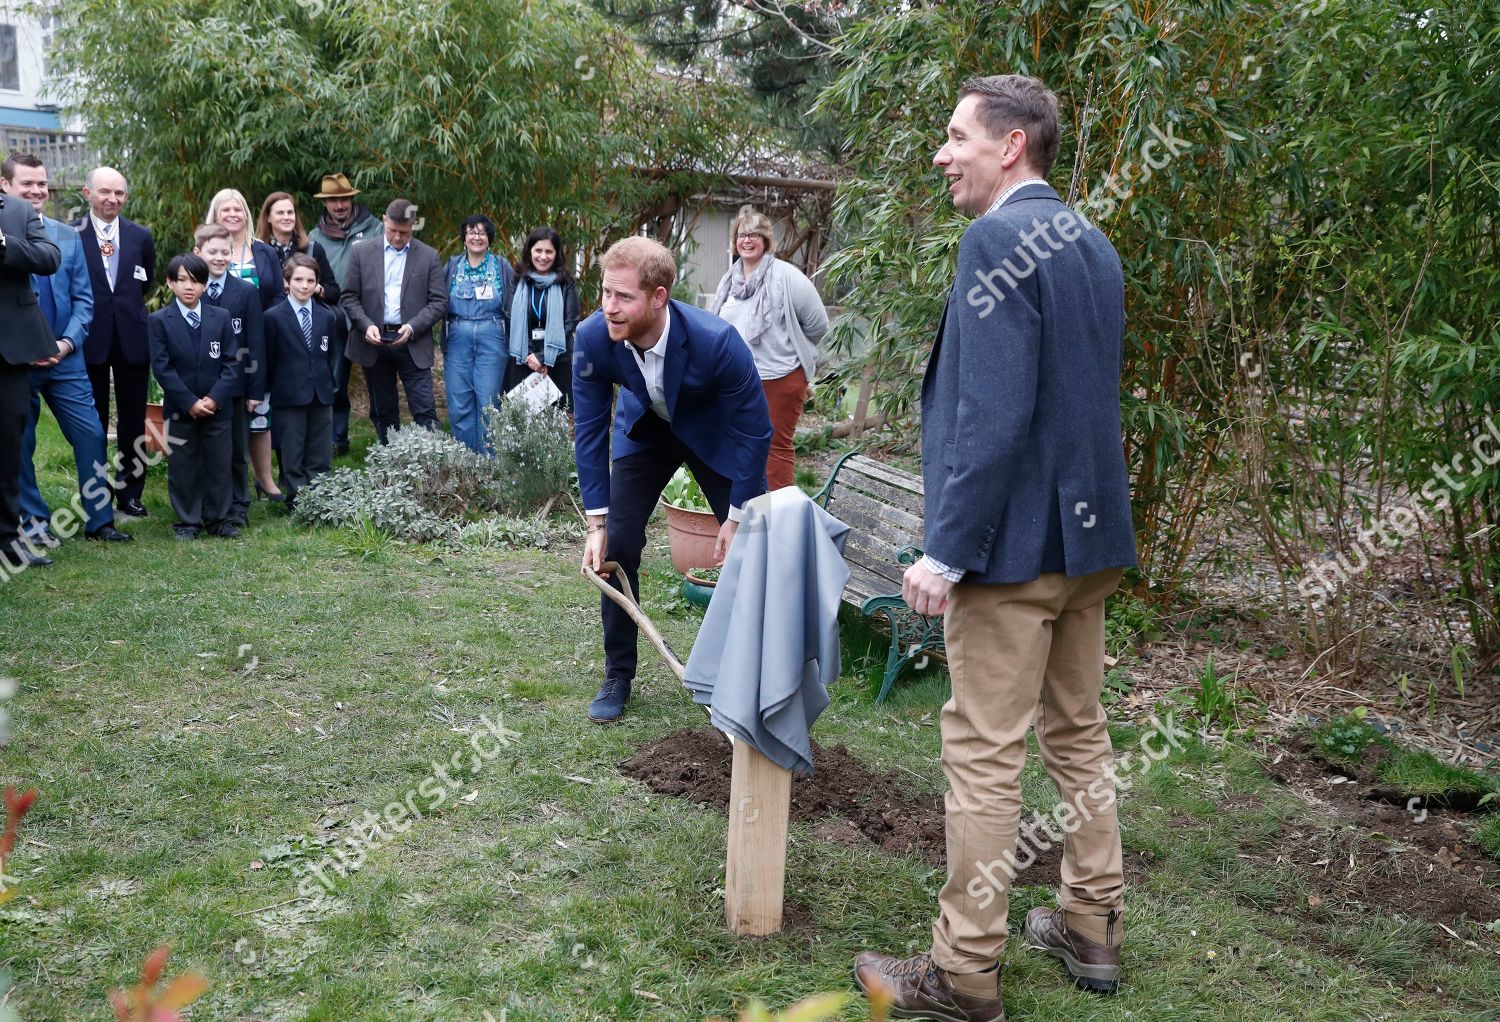 prince-harry-visits-st-vincents-catholic-primary-school-for-commonwealth-canopy-and-woodland-trust-tree-planting-ceremony-london-uk-shutterstock-editorial-10161063o.jpg